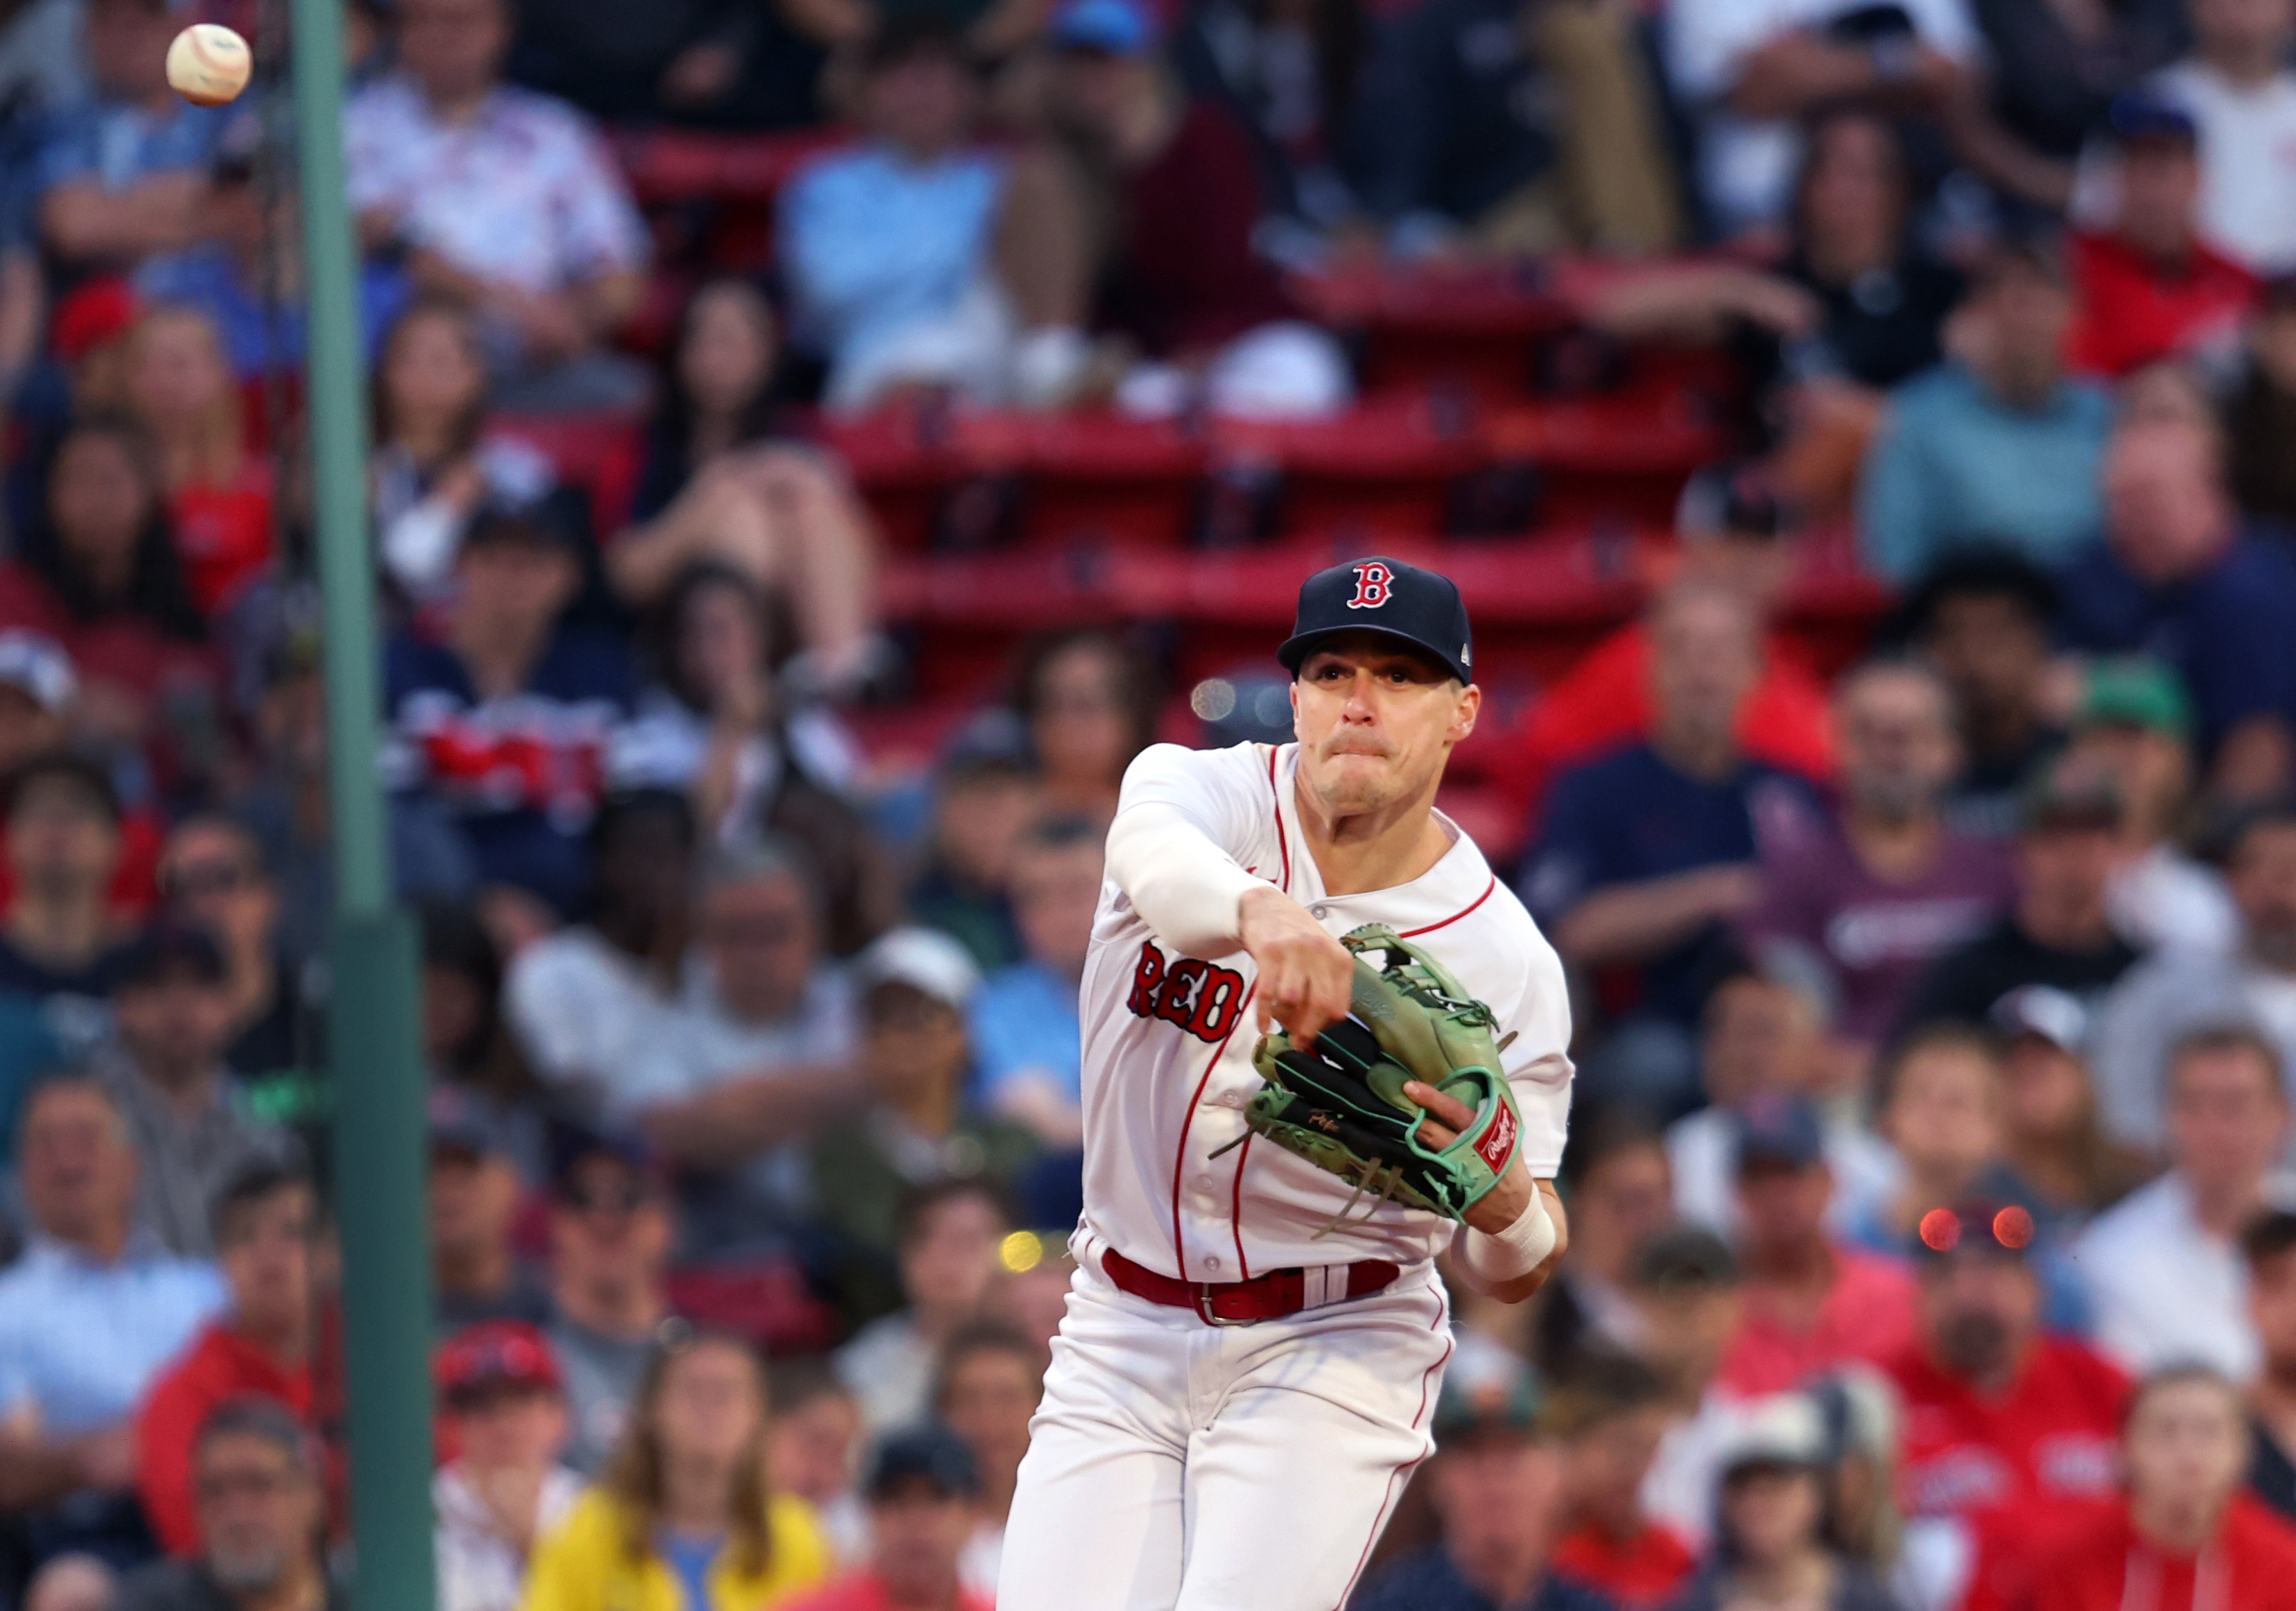 MLB Notebook: Red Sox's defensive issues could complicate Justin